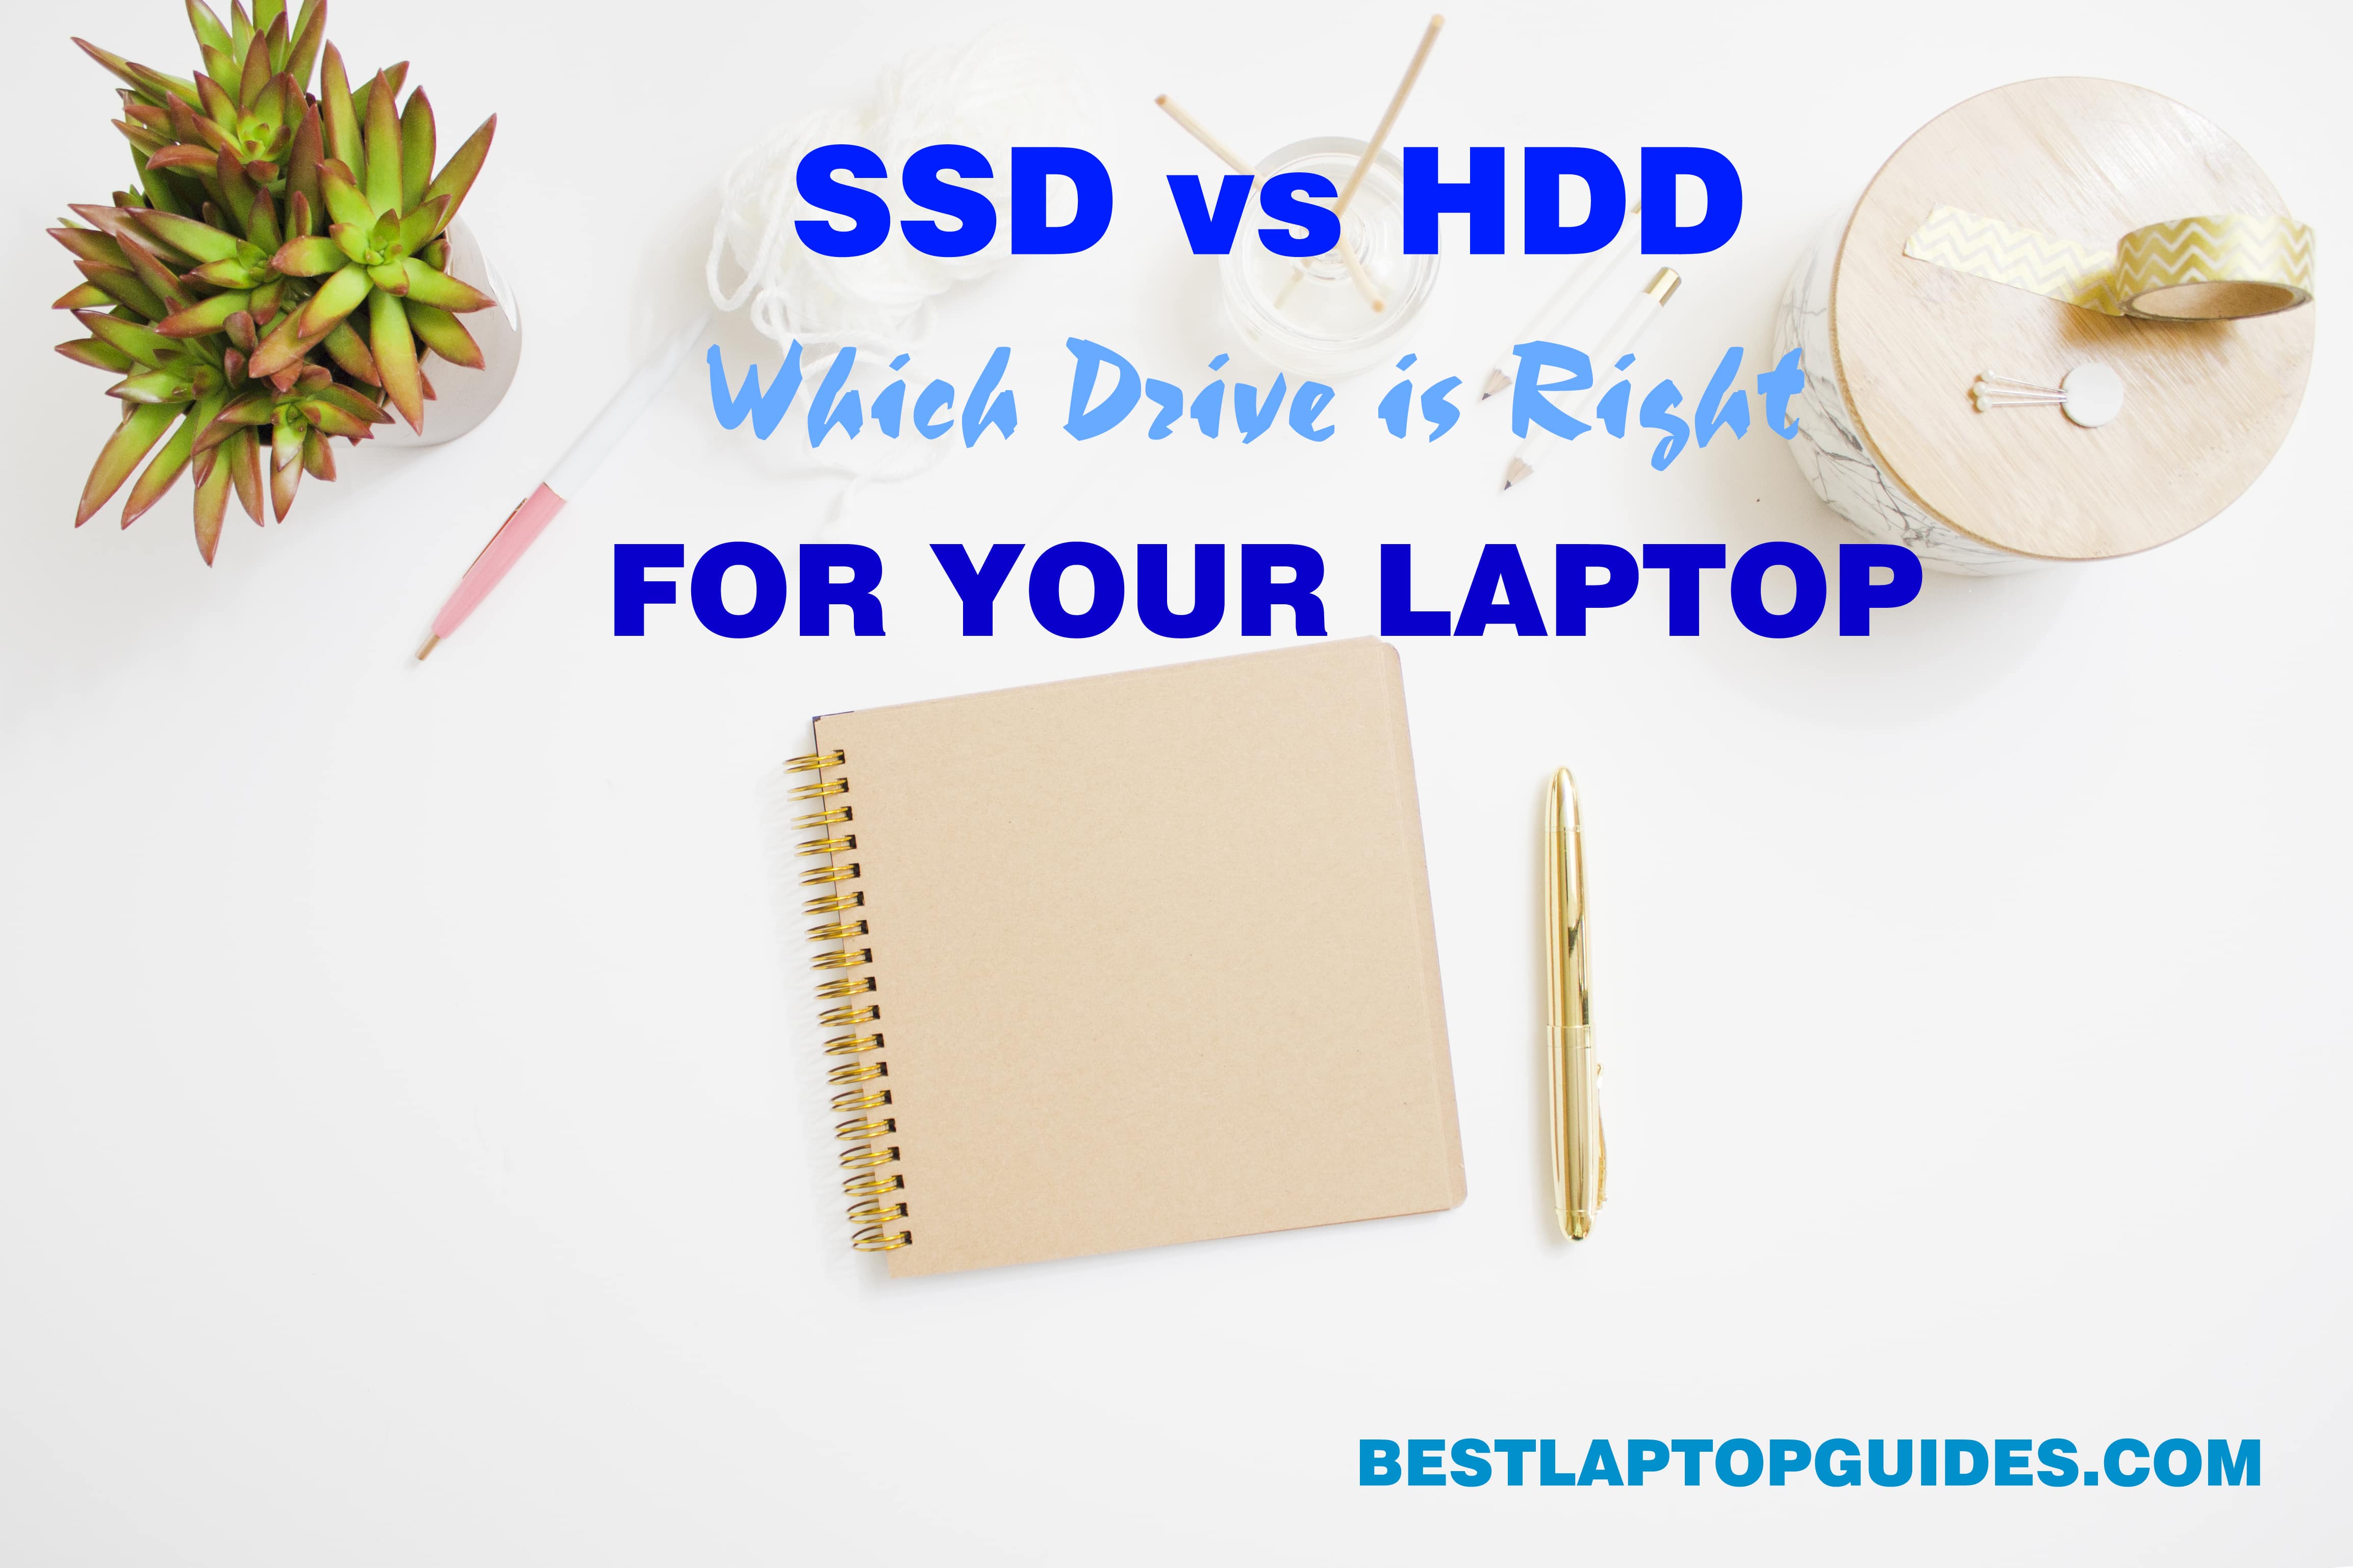 SSD vs HDD- Which Drive is Right for Your Laptop